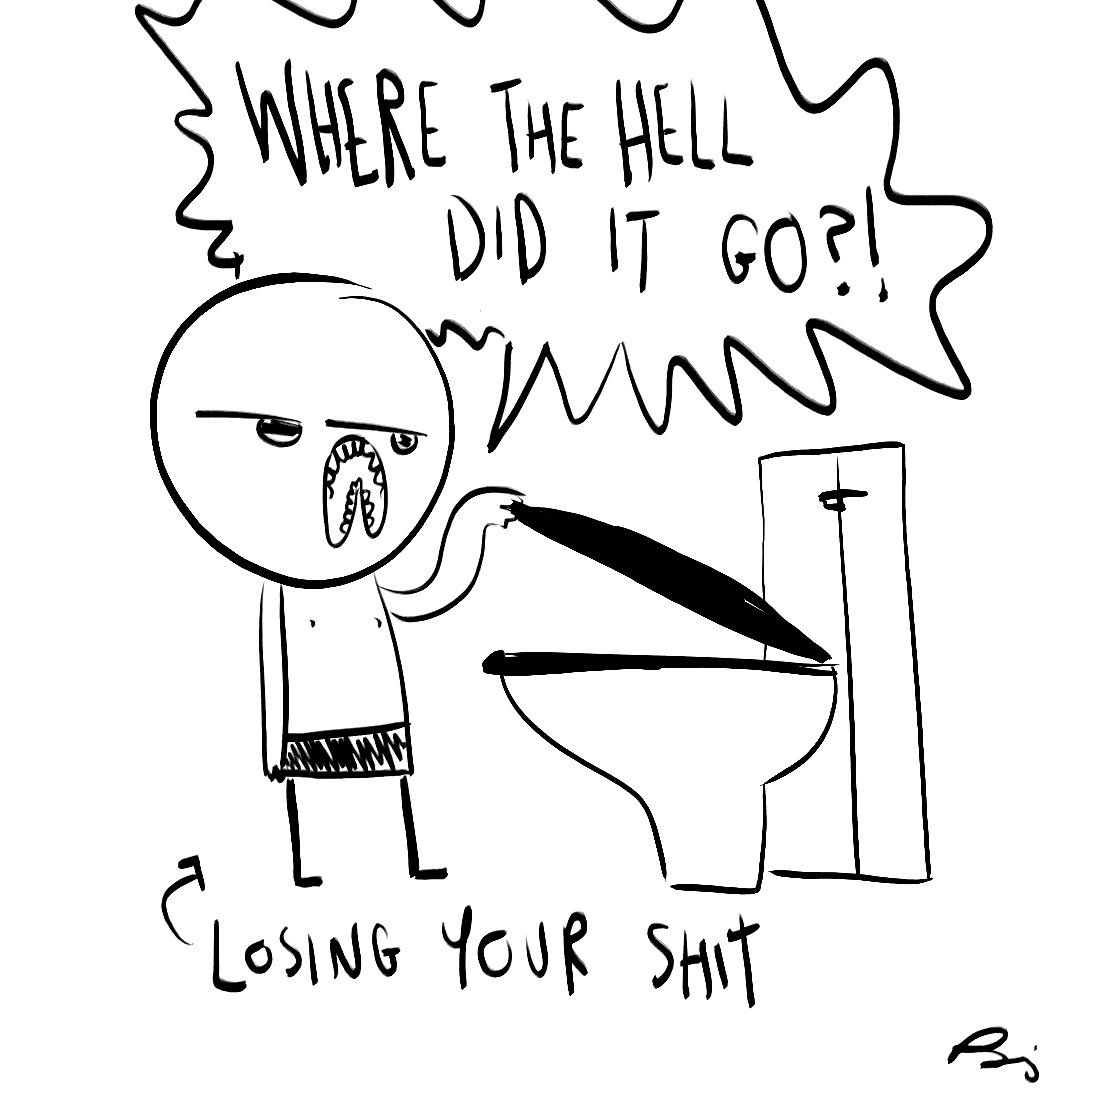 Tut and Groan Guest toon: Losing Your Shit by Pais cartoon